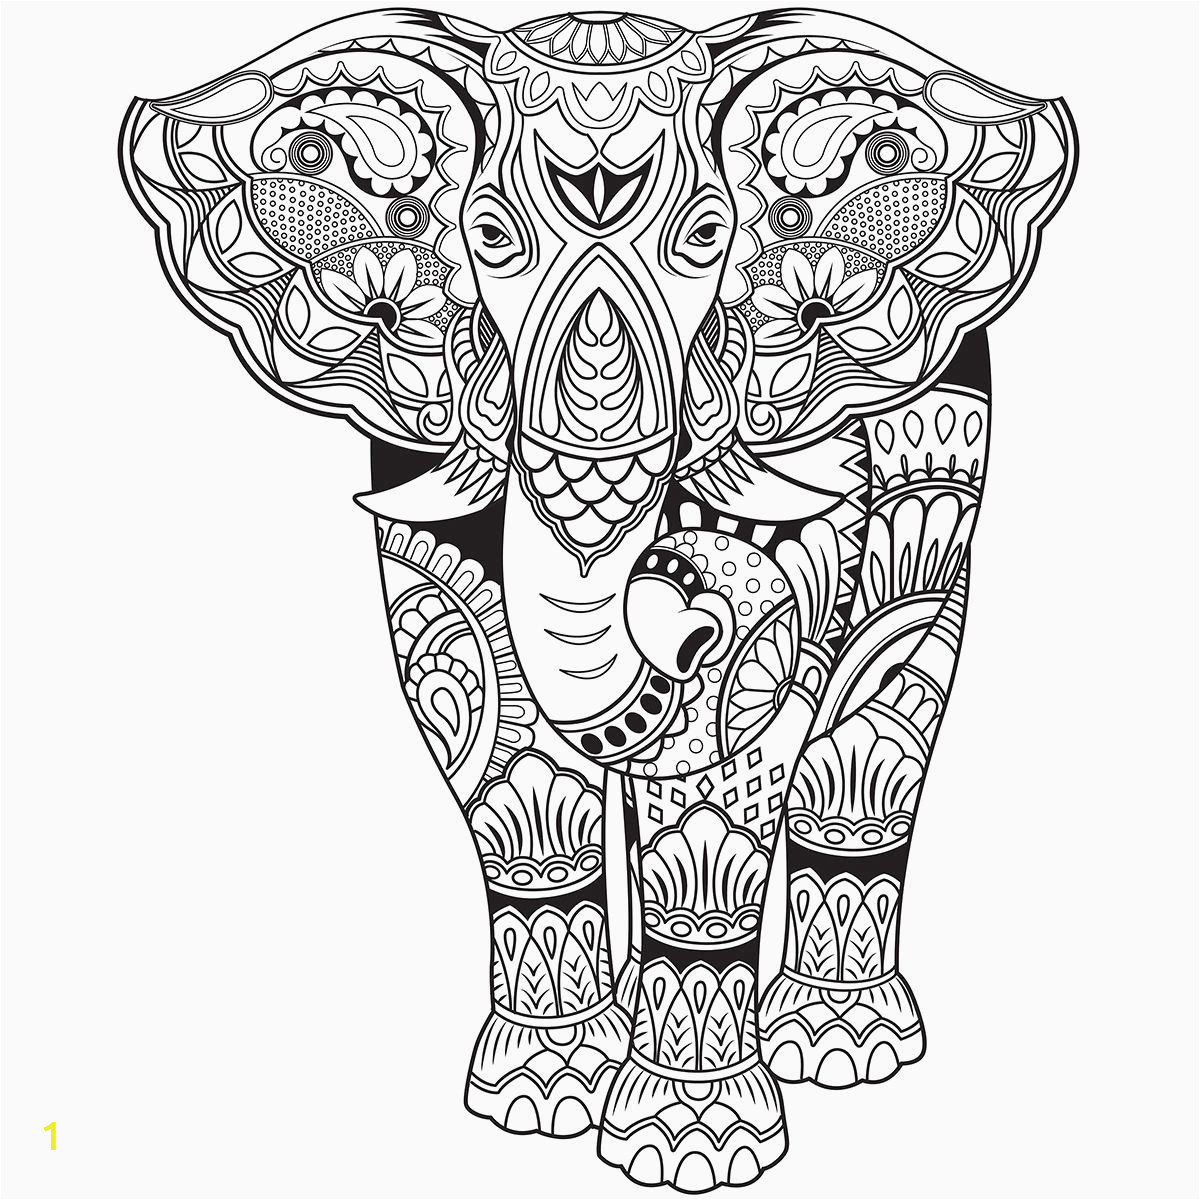 Free Printable Elephant Coloring Pages for Adults Elephant Coloring Page for Adults Luxury Elephant